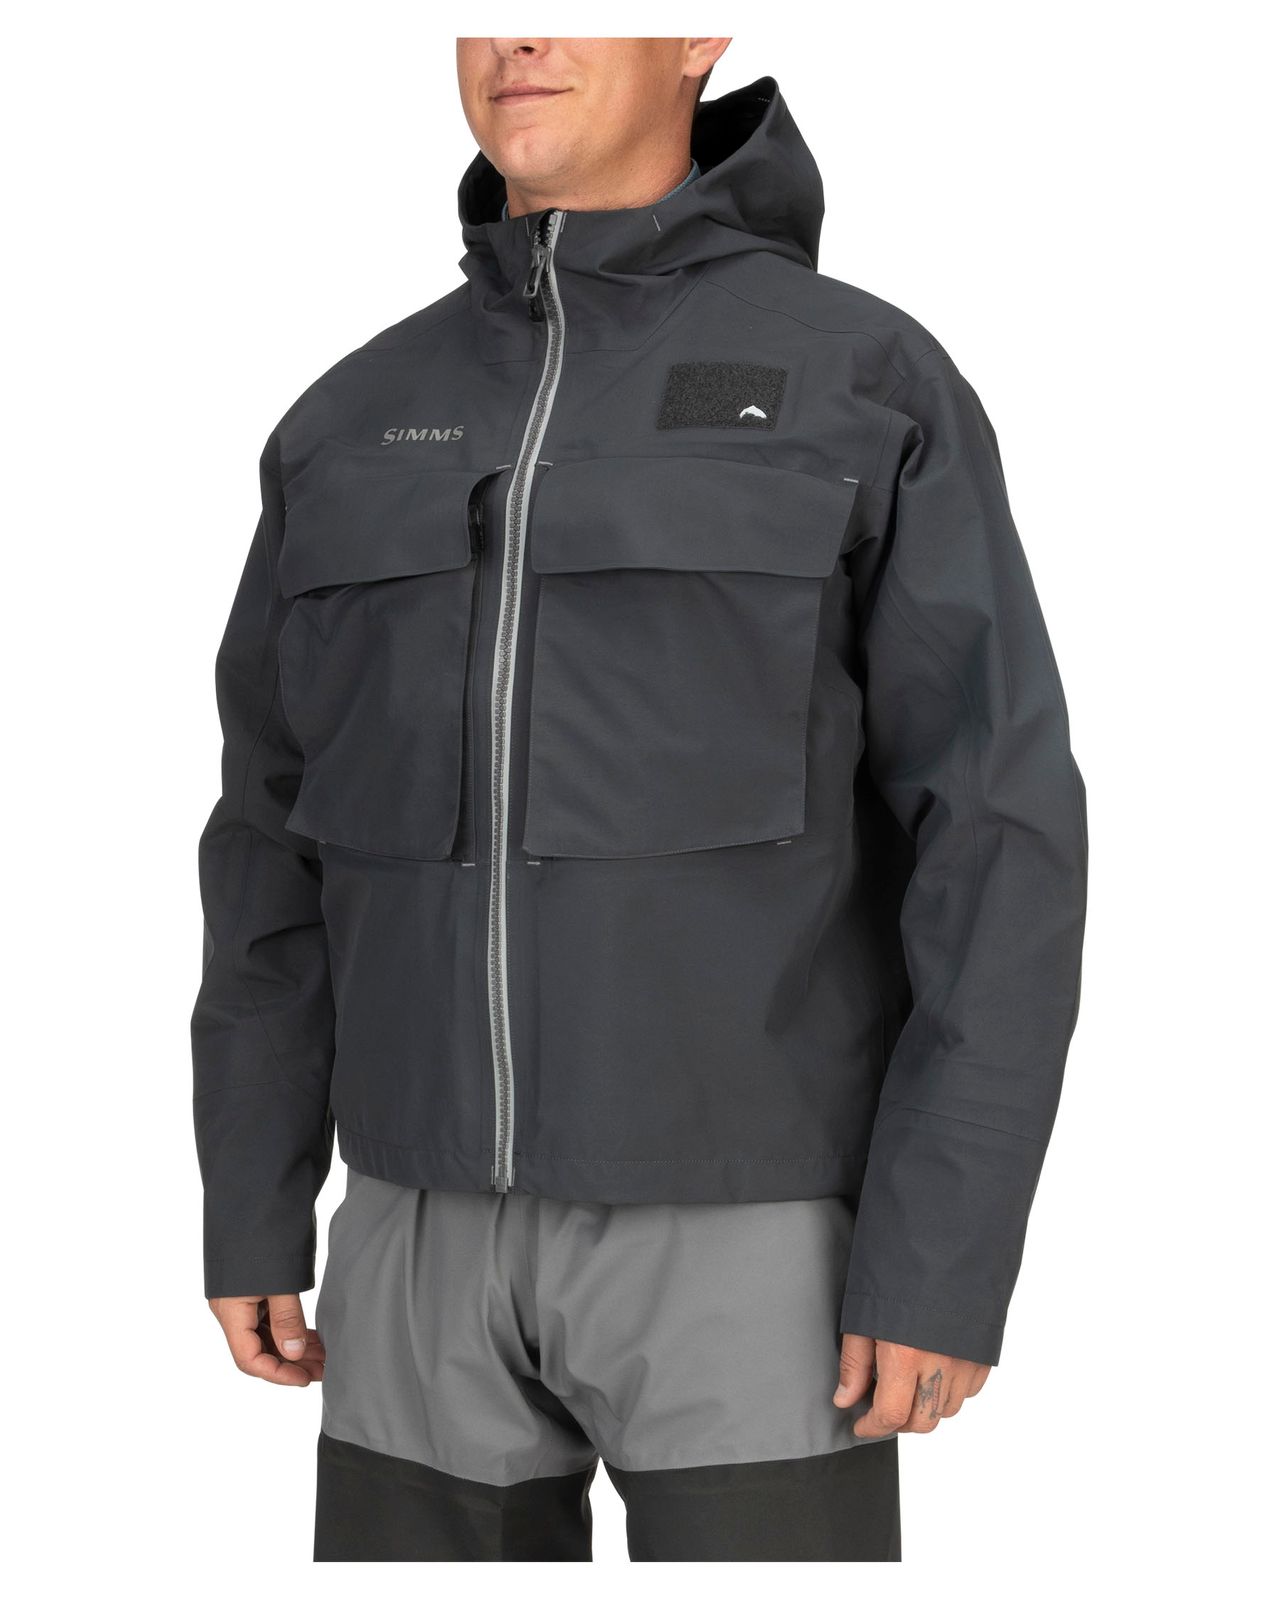 Simms Guide Classic - Carbon